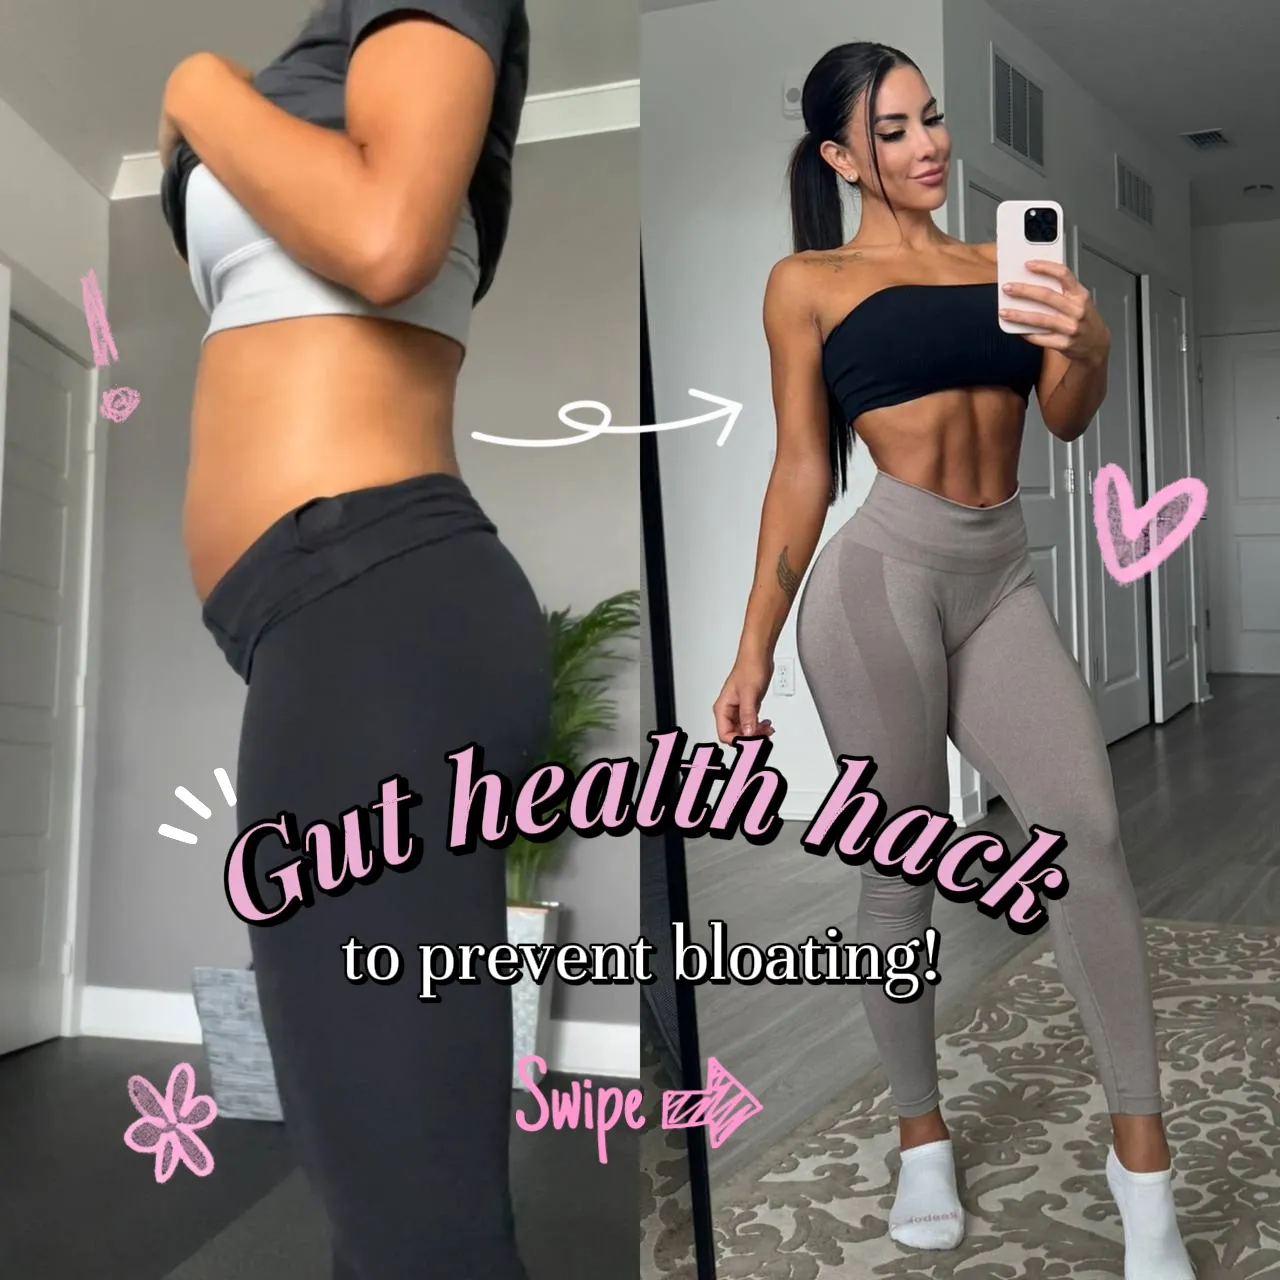 10% off CODE HAPPY10, My Belly debloating hack to help keep the bloat away  for good ! The amount of foods I CAN eat now and don't have